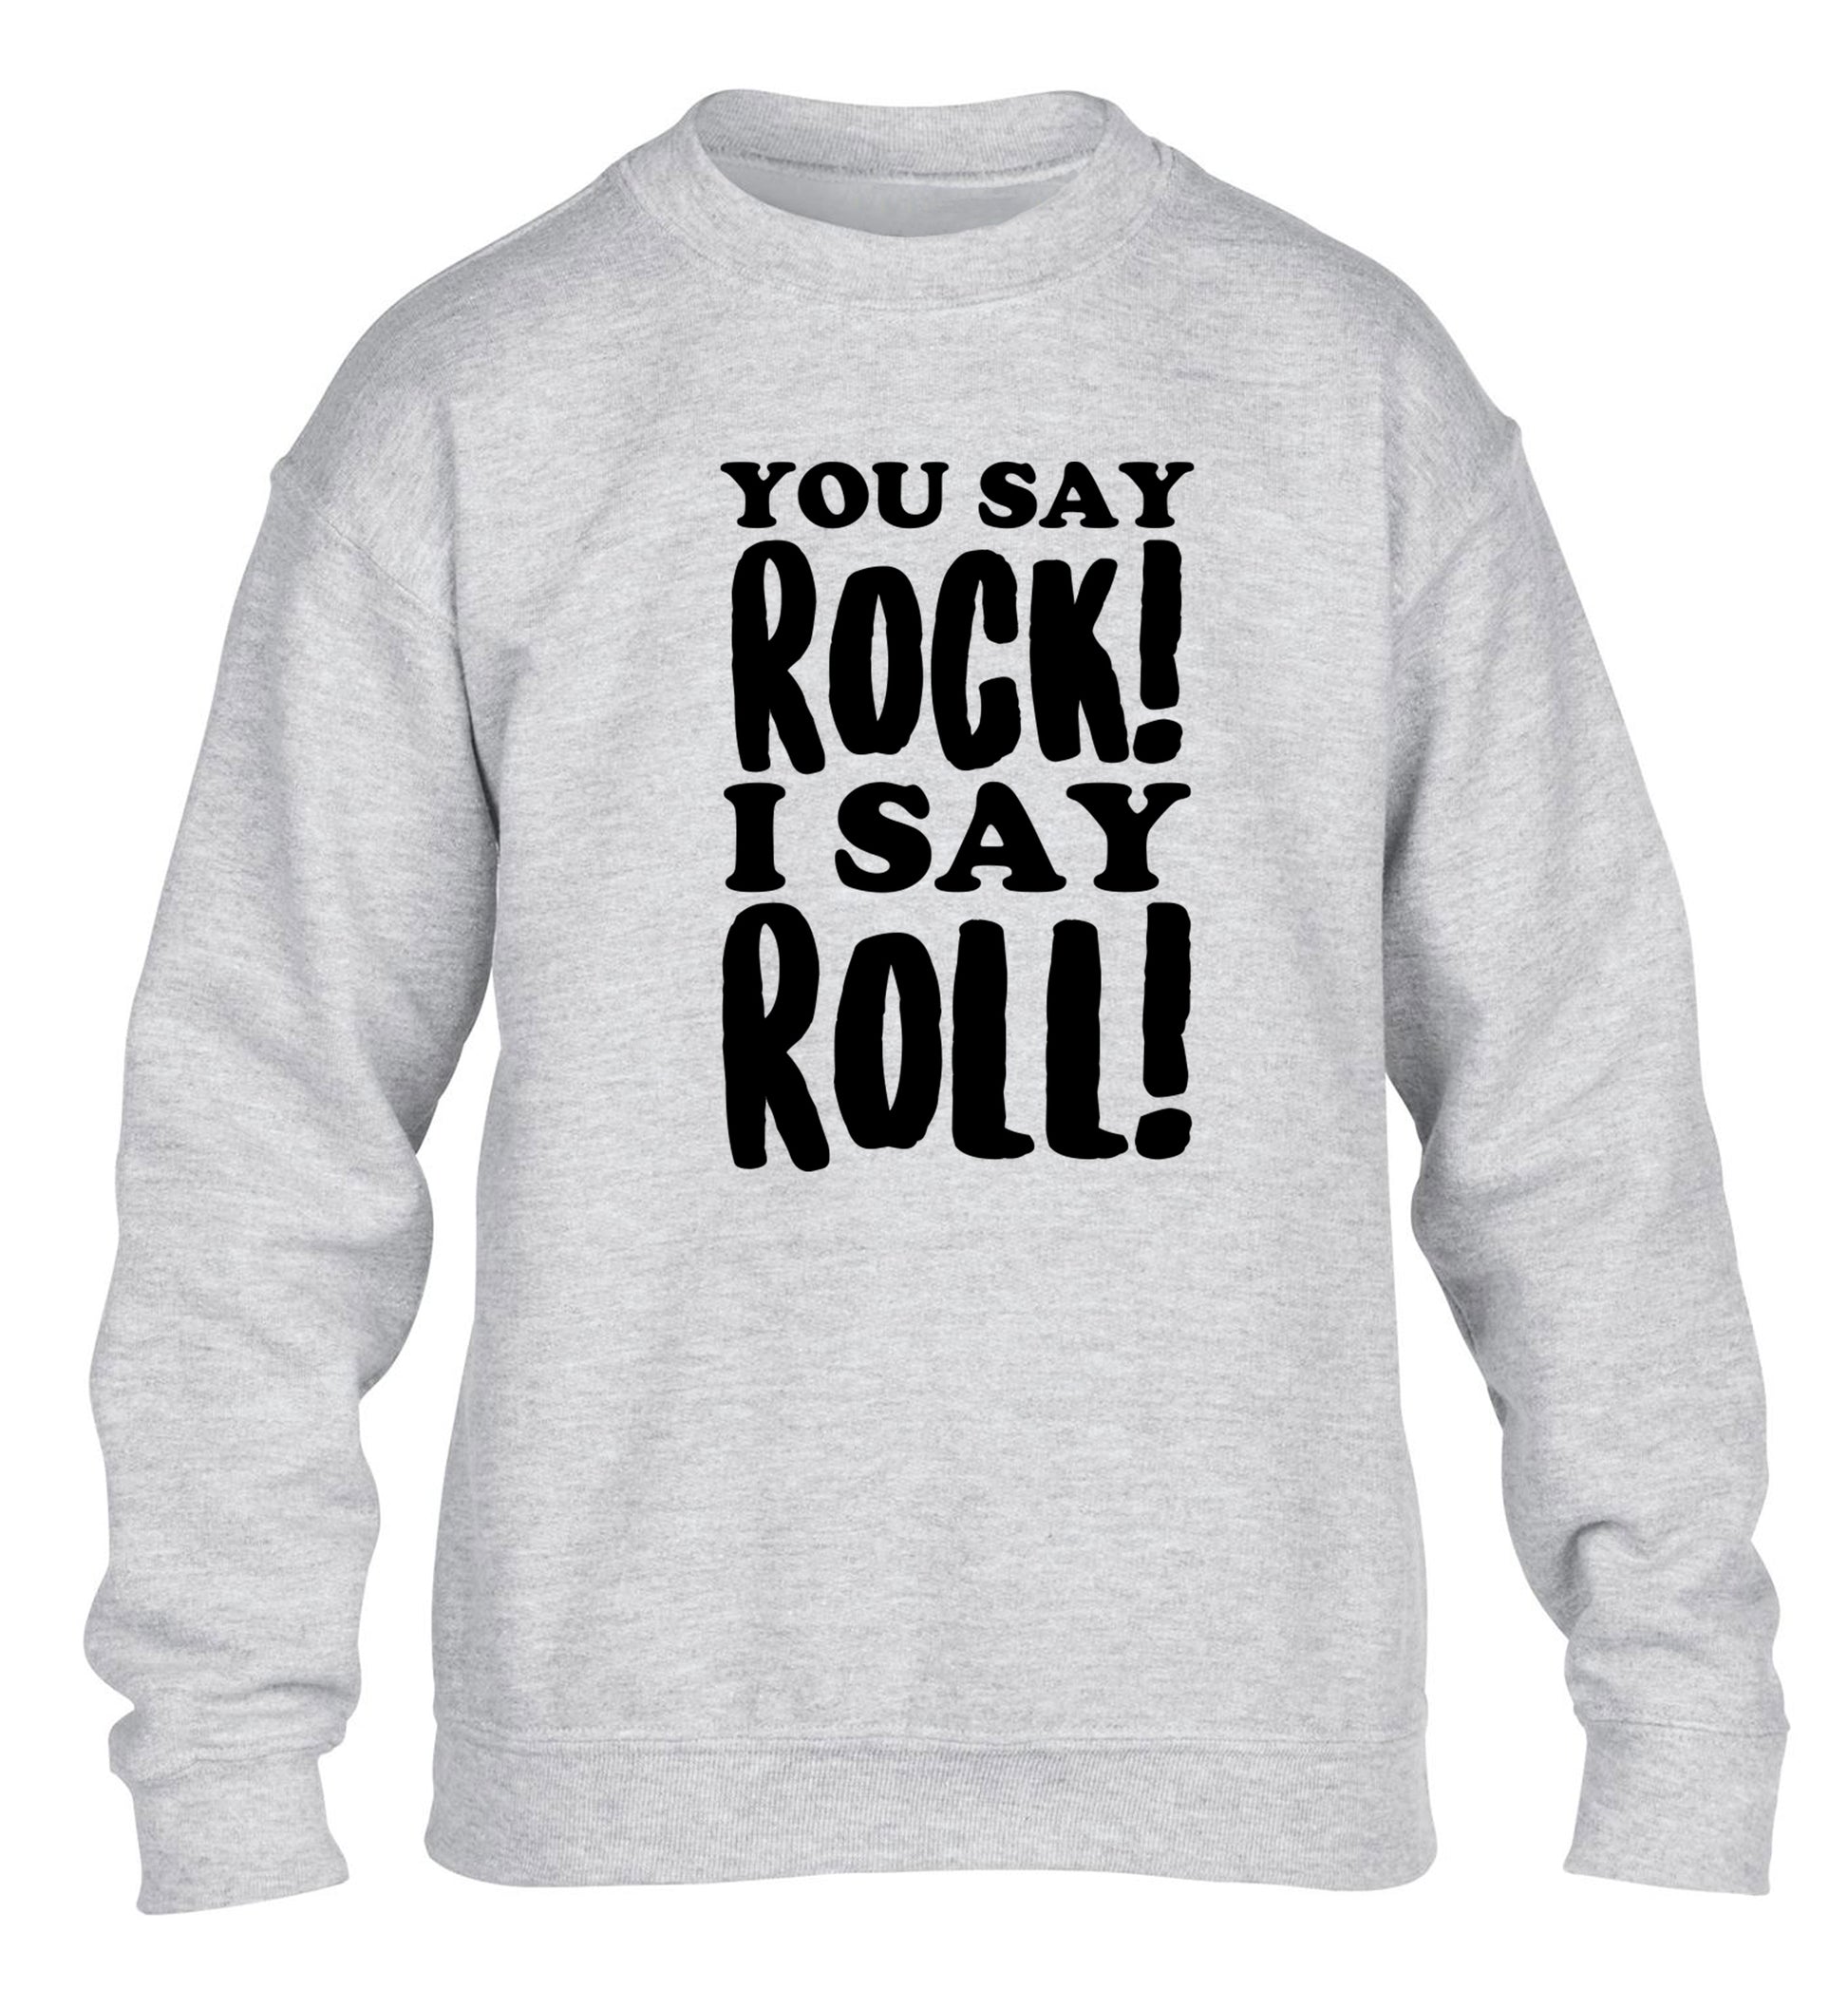 You say rock I say roll! children's grey sweater 12-14 Years